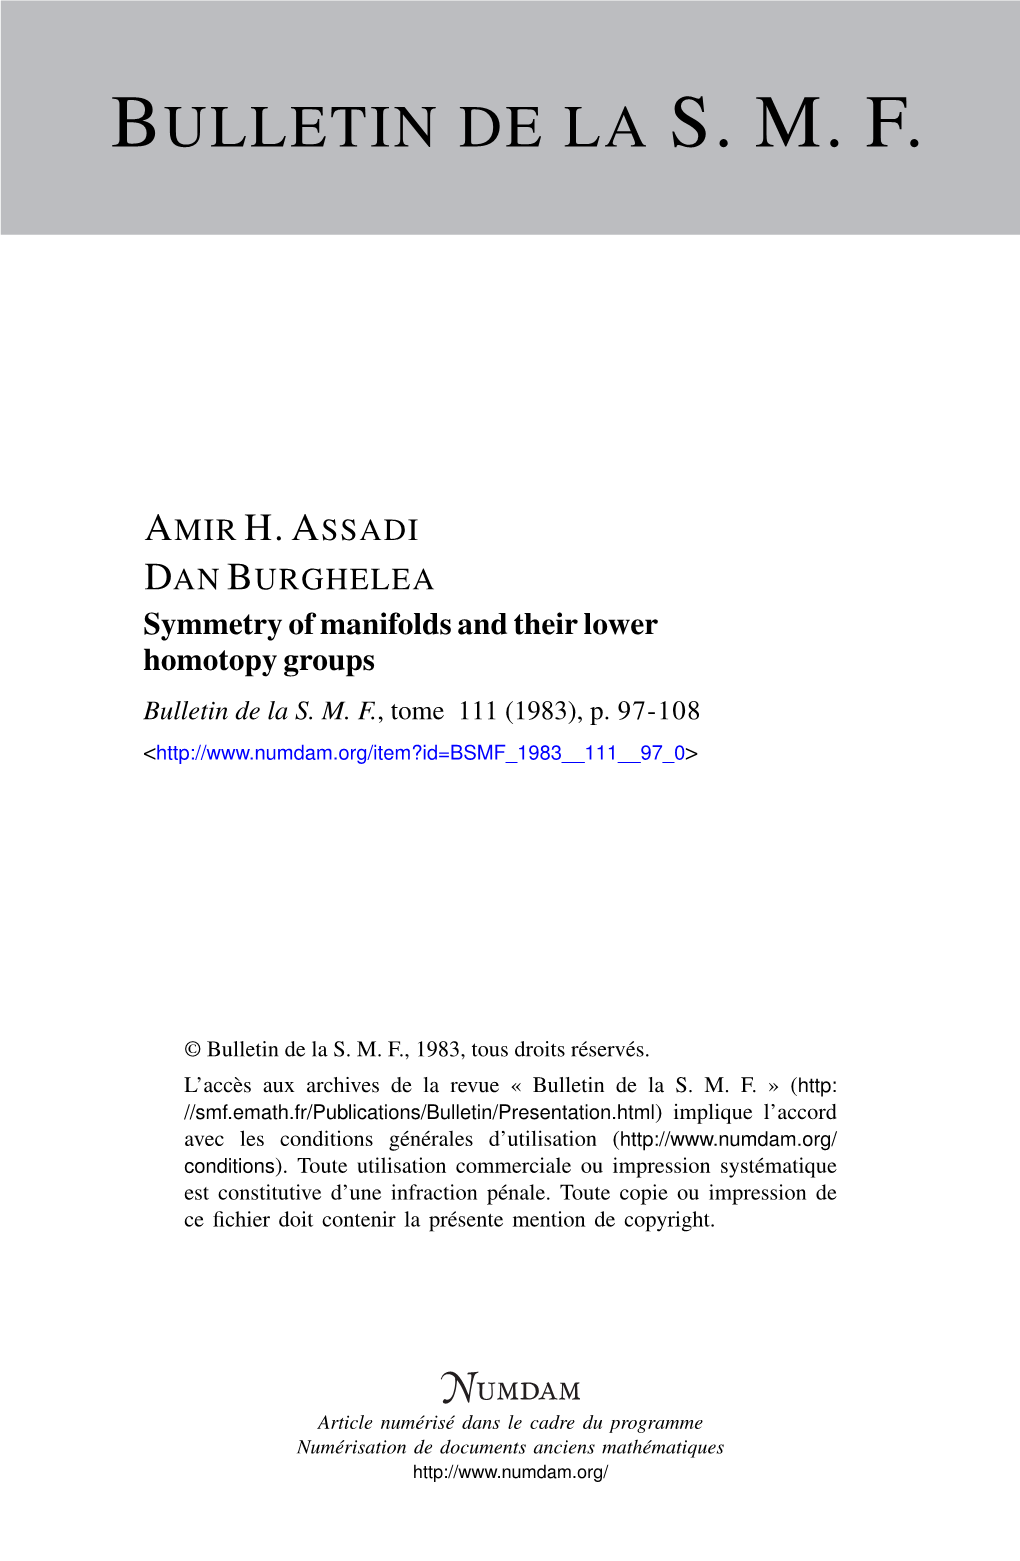 Symmetry of Manifolds and Their Lower Homotopy Groups Bulletin De La S